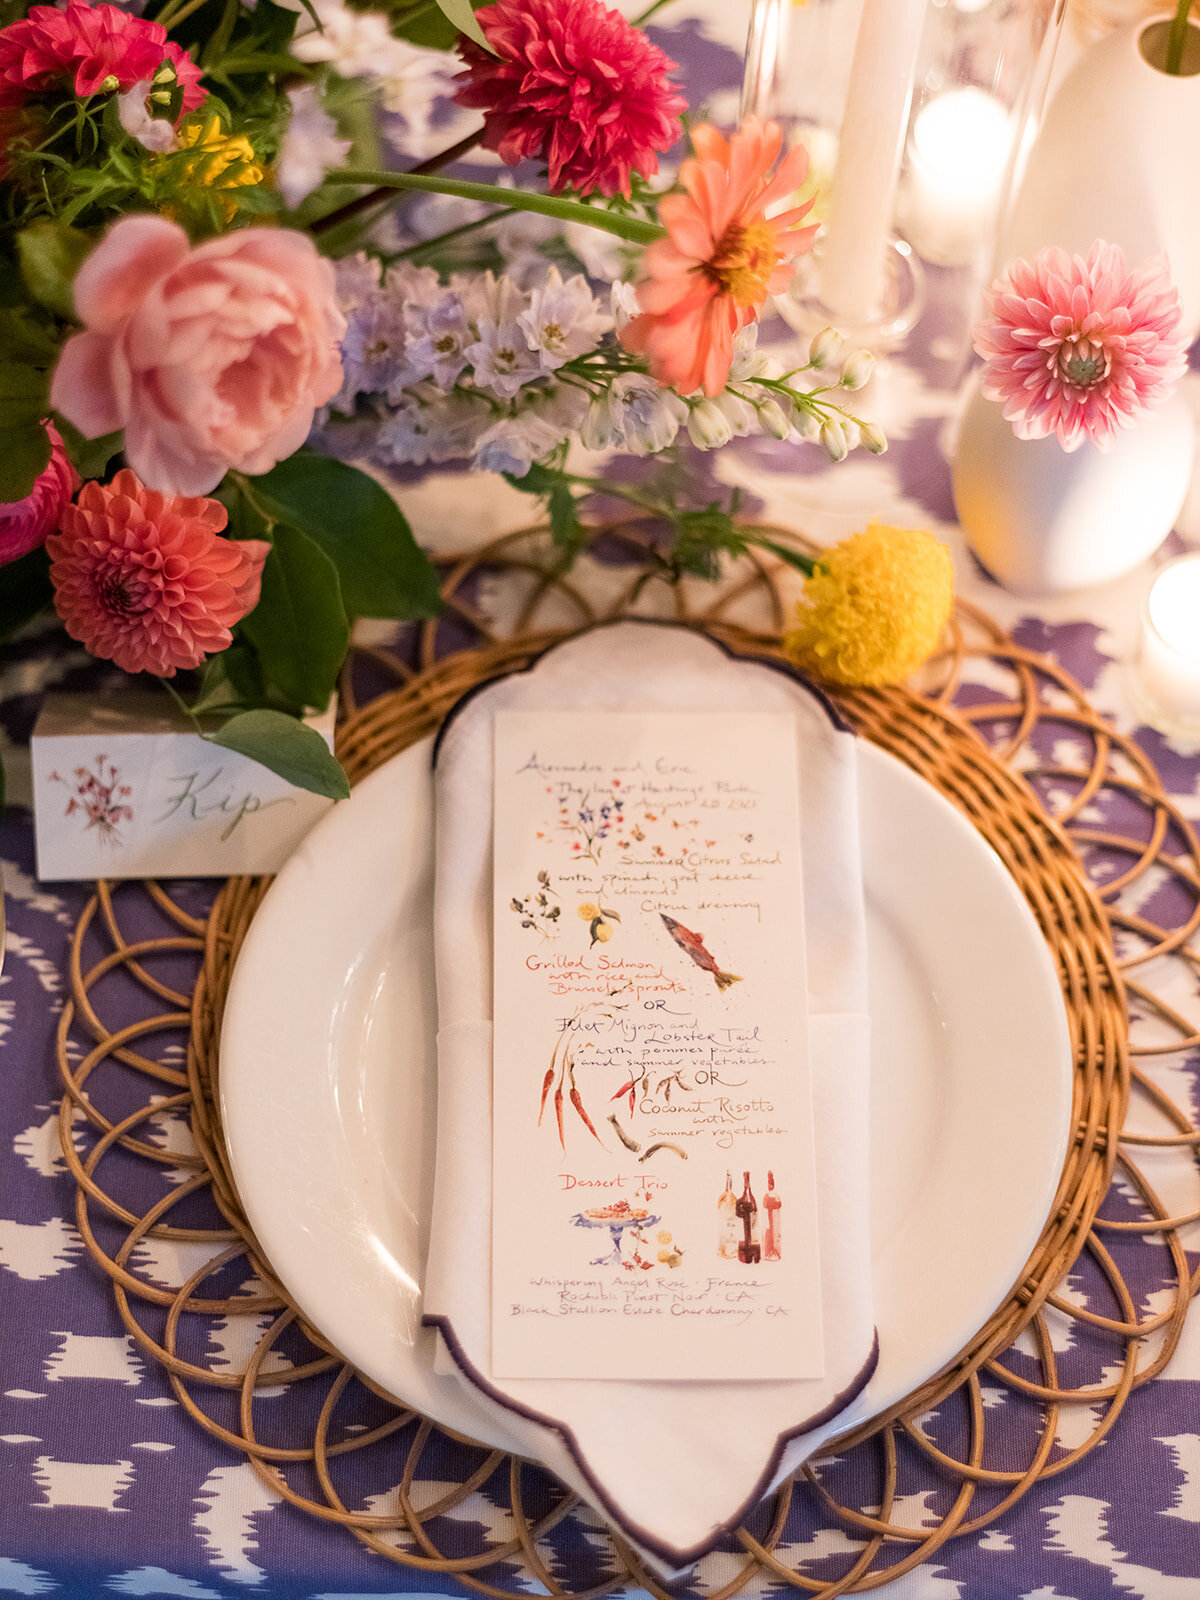 Kate-Murtaugh-Events-RI-wedding-planner-micro-wedding-Inn-at-Hastings-Park-Lexington-Boston-MA-luxury-elopement-colorful-dahlia-florals-candlelight-dinner-table-scalloped-napkin